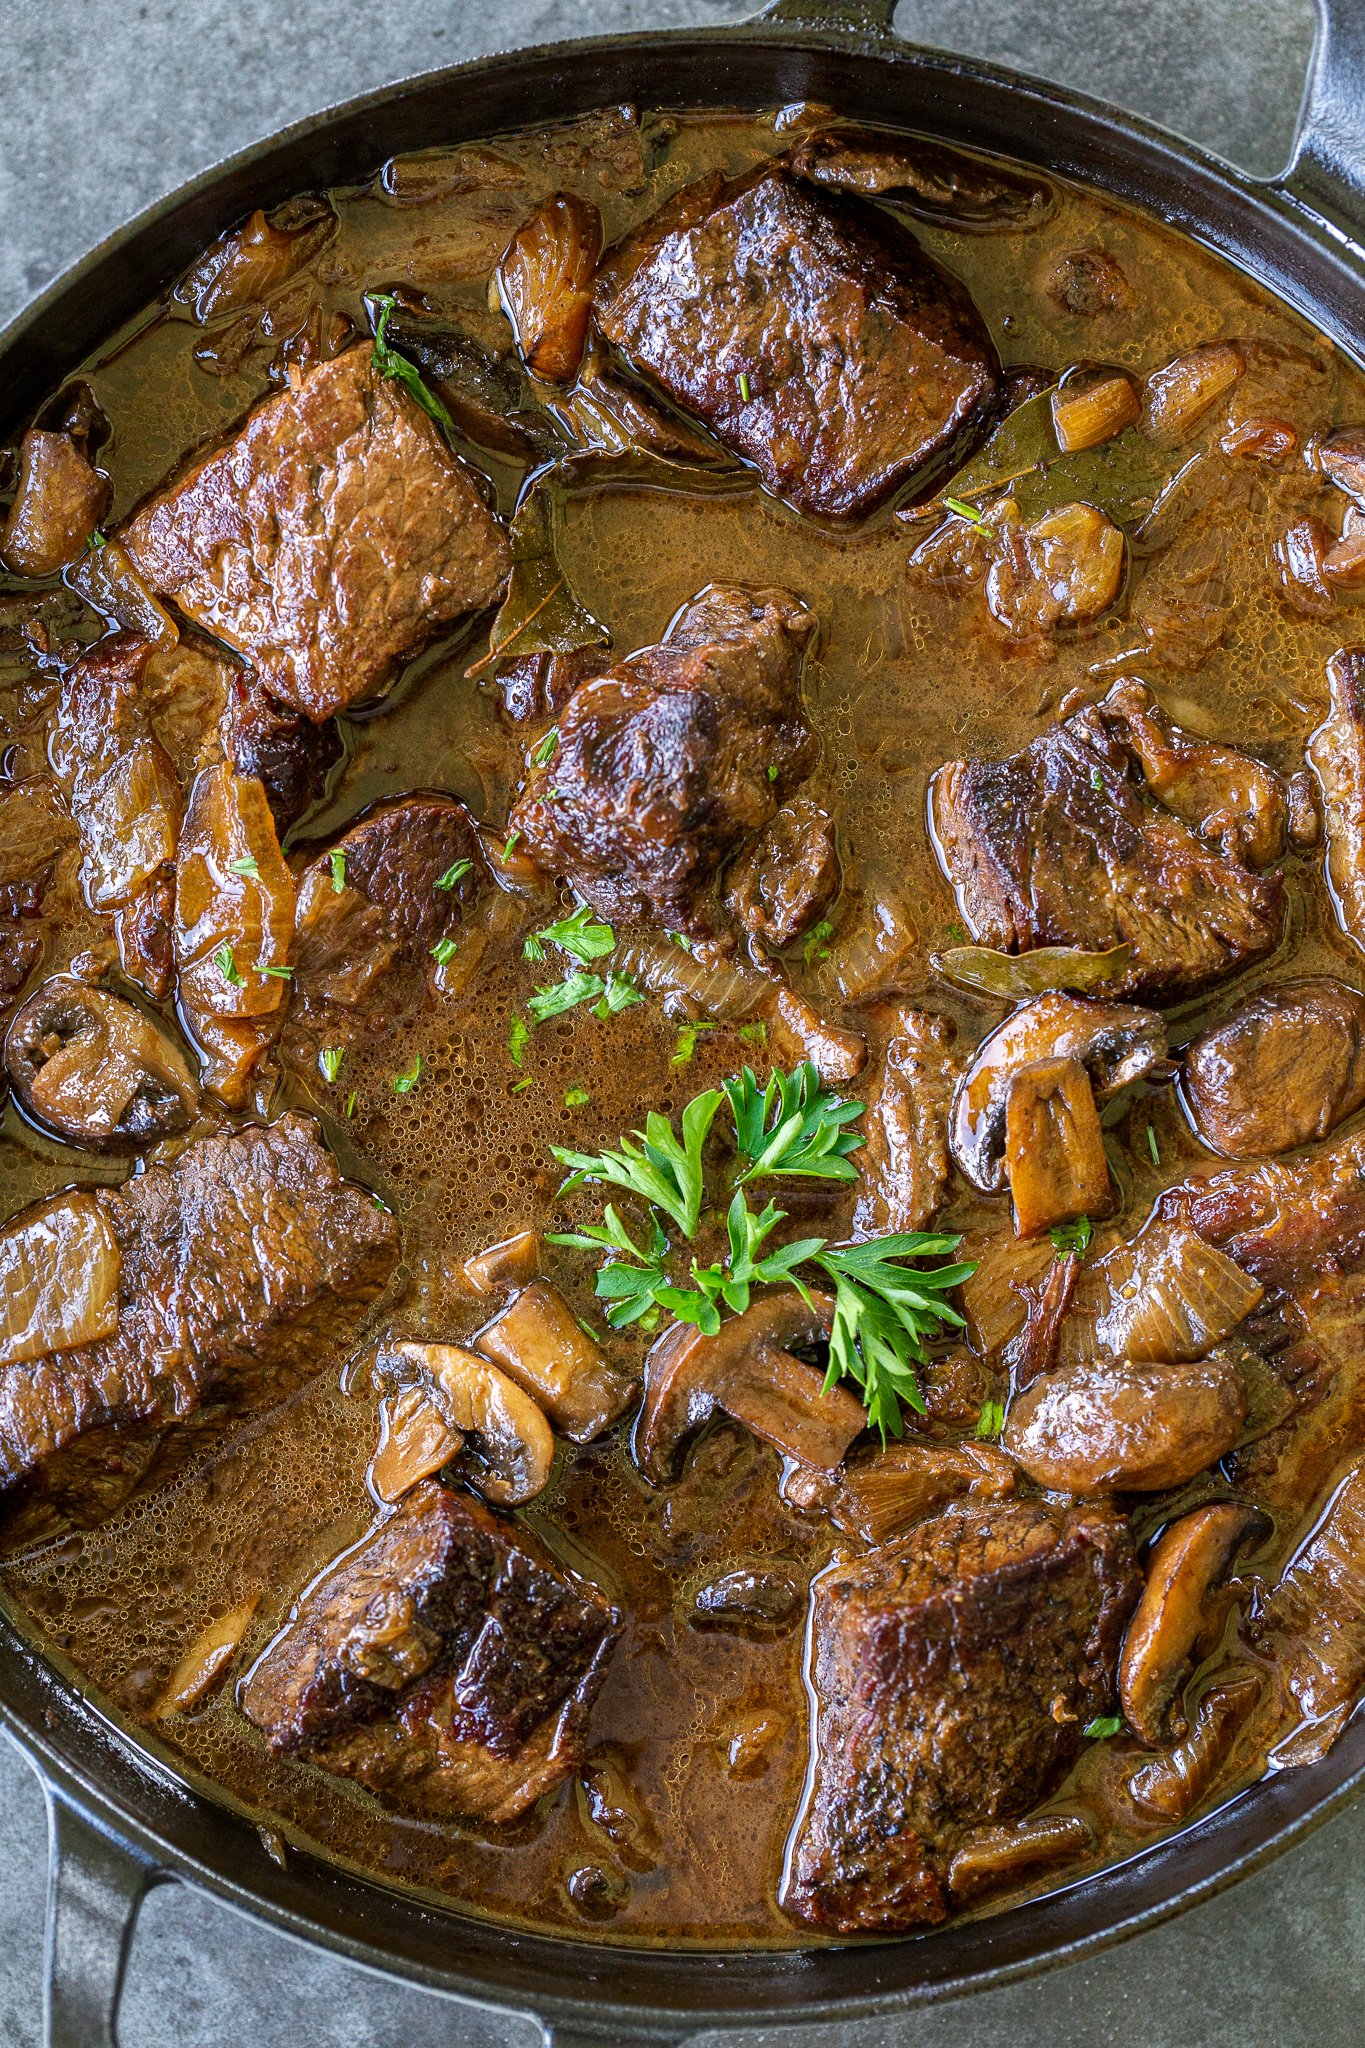 Slow Braised Beef Stew With Mushrooms - Tate Abilootich